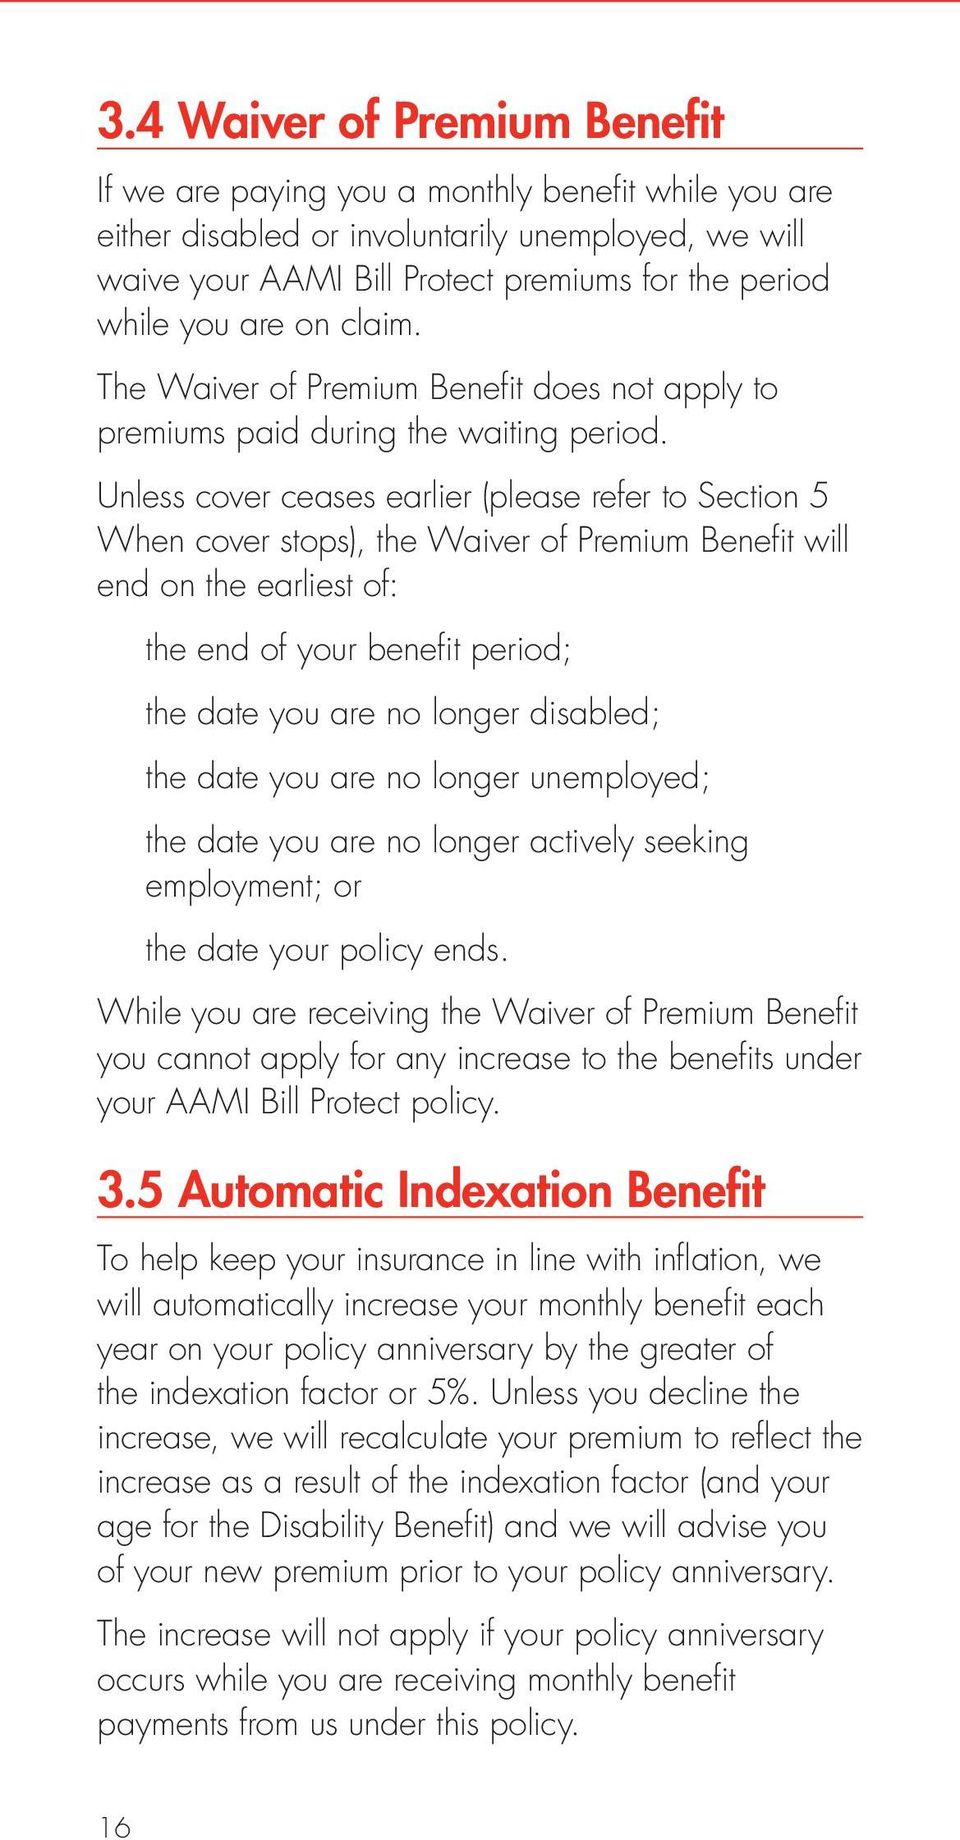 Unless cover ceases earlier (please refer to Section 5 When cover stops), the Waiver of Premium Benefit will end on the earliest of: the end of your benefit period; the date you are no longer